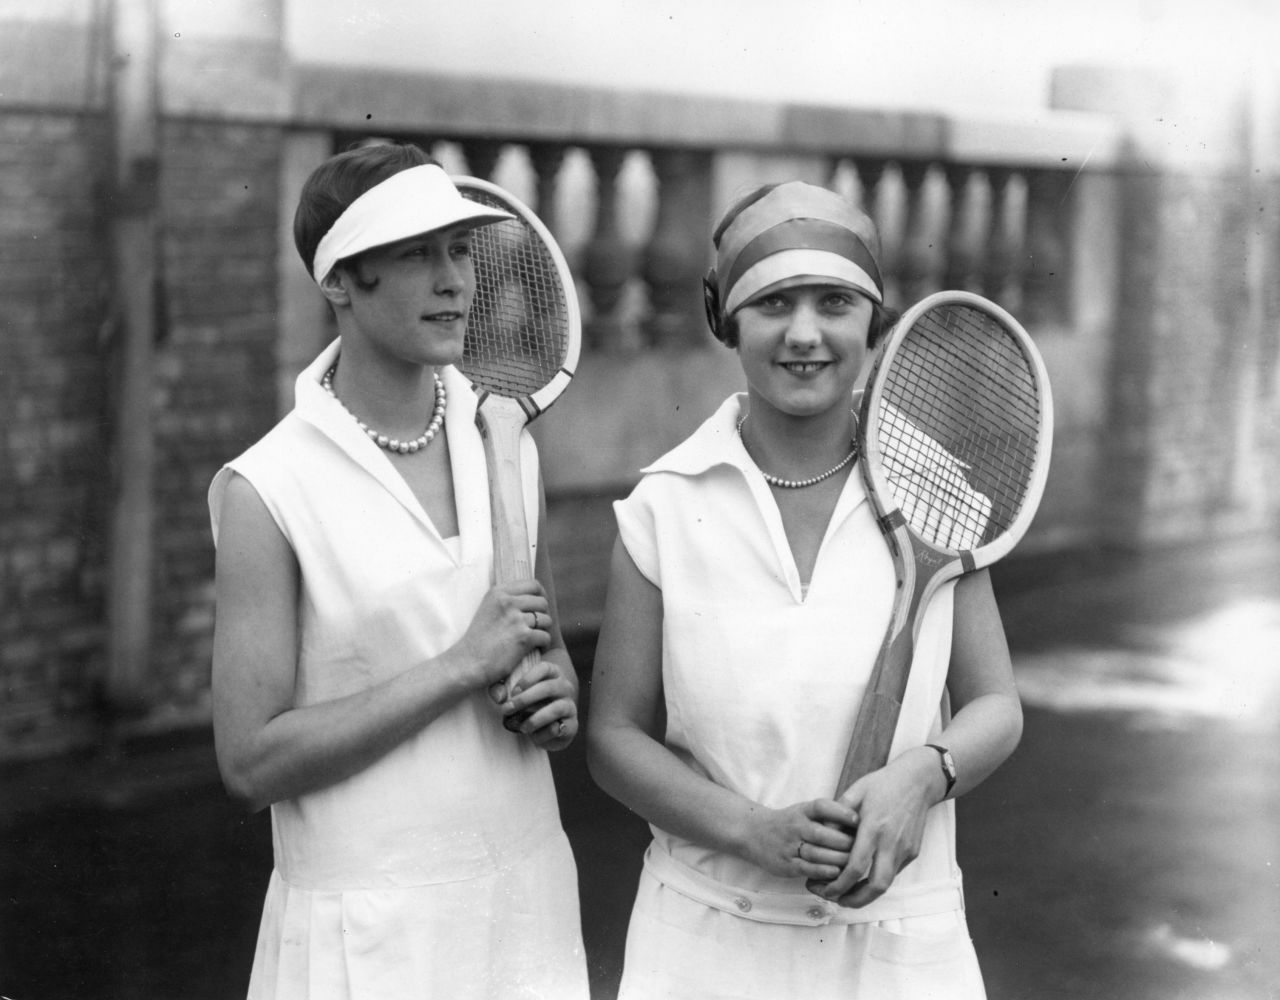 "One of the earliest innovations they had was the wearing of all-white, which caught on pretty quickly because it was a way for sweat to be hidden," explains Rothenberg of a dress code that still remains at Wimbledon today.<br />"Especially for the women, being seen to be perspiring was unthinkable and incredibly unsightly."<br />By the 1920s, sportswear had become less restrictive, with these two women wearing sleeveless tops and sun visors in 1926.